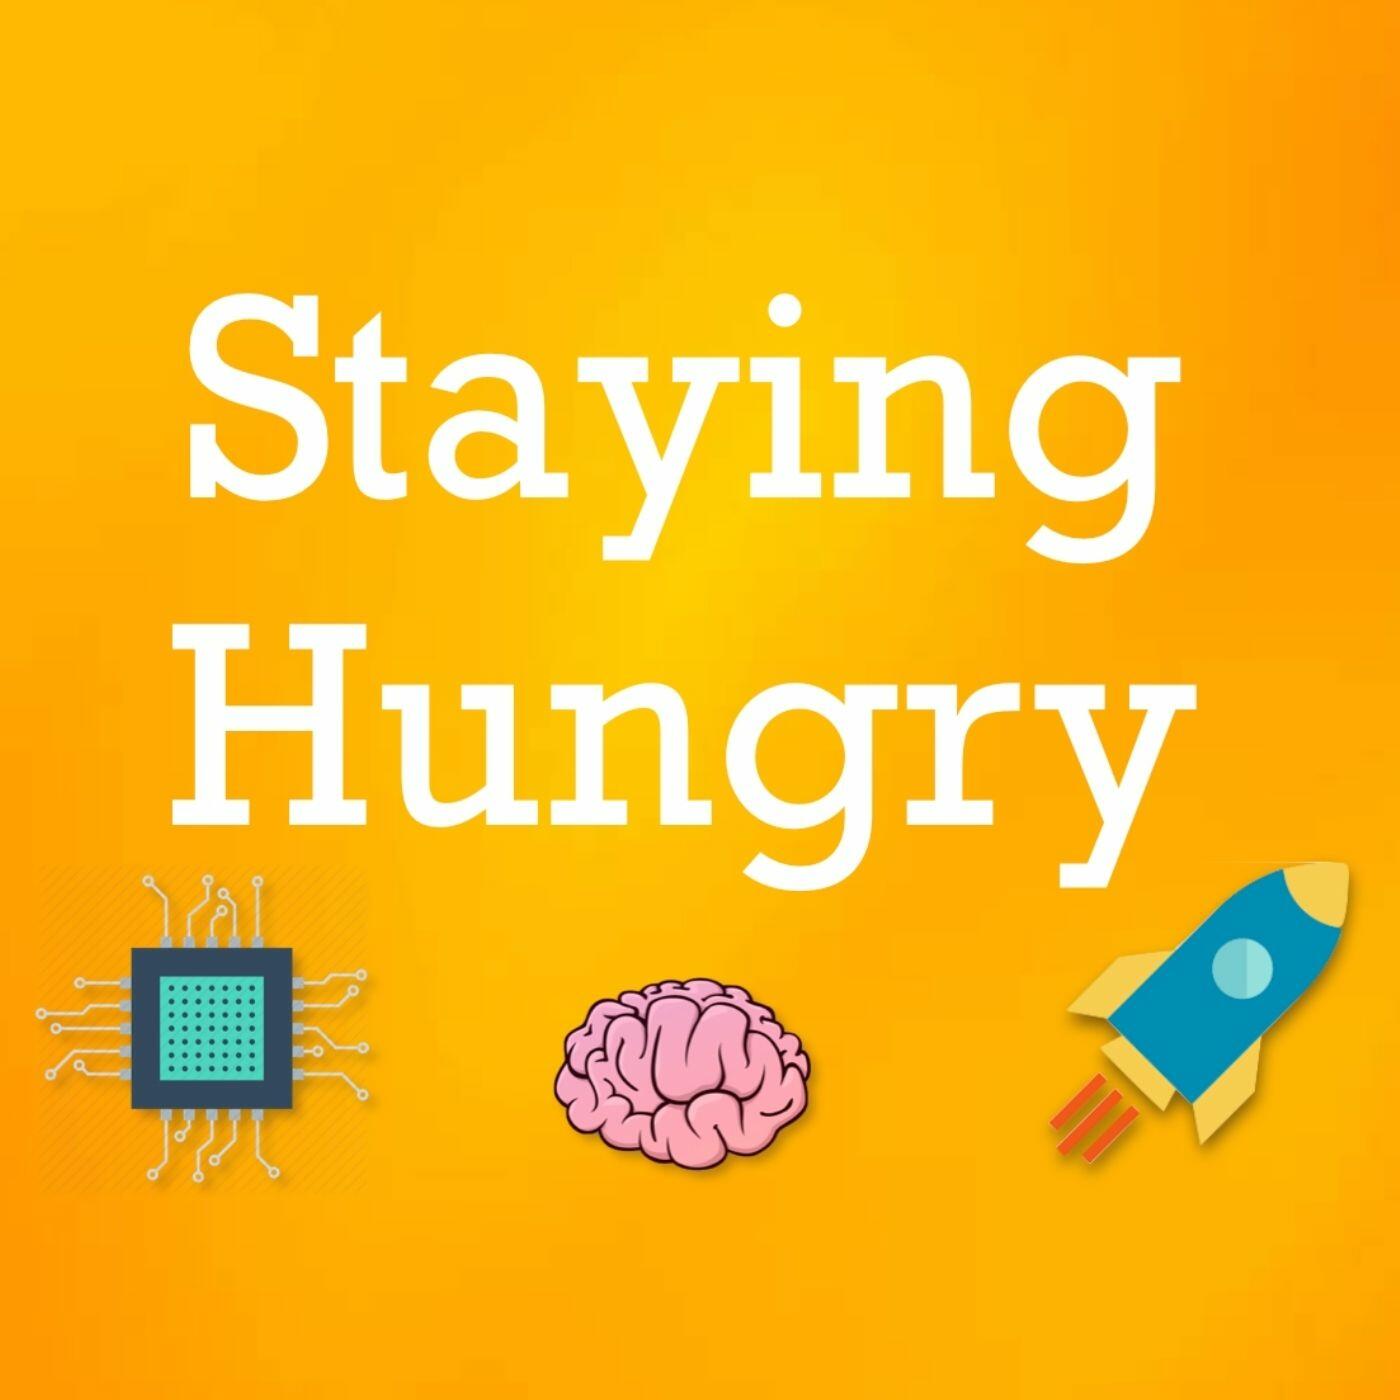 Staying my life. Stay hungry фестиваль. We stay Hunger. We stay hungry.